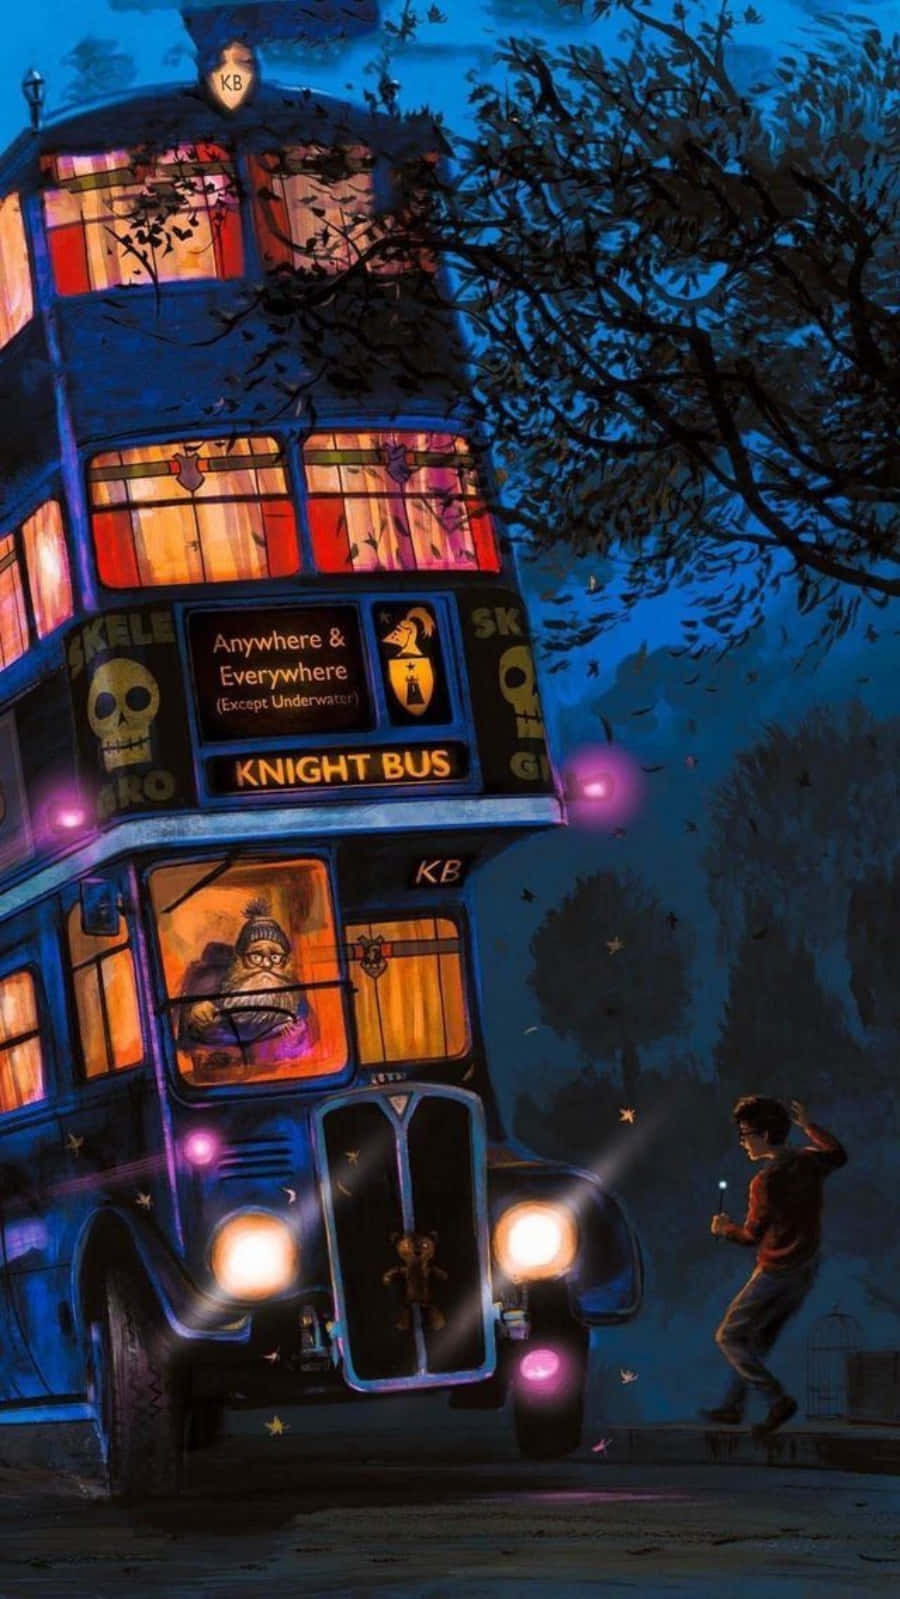 Welcome to the magical world of Hogwarts - a place to take a ride on the Knight Bus." Wallpaper